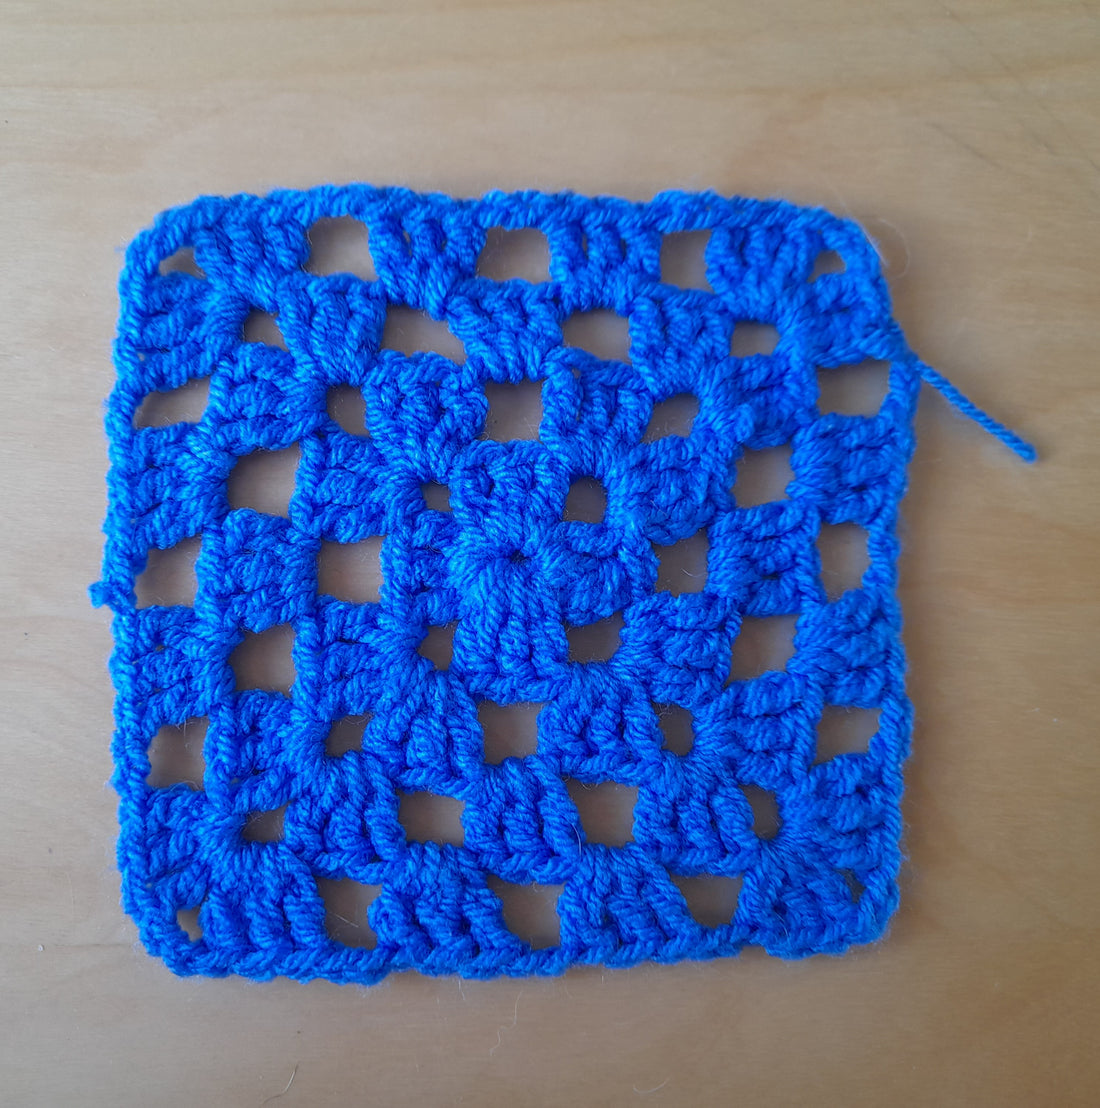 How to Crochet a Granny Square [Step-By-Step Tutorial Video + Pro